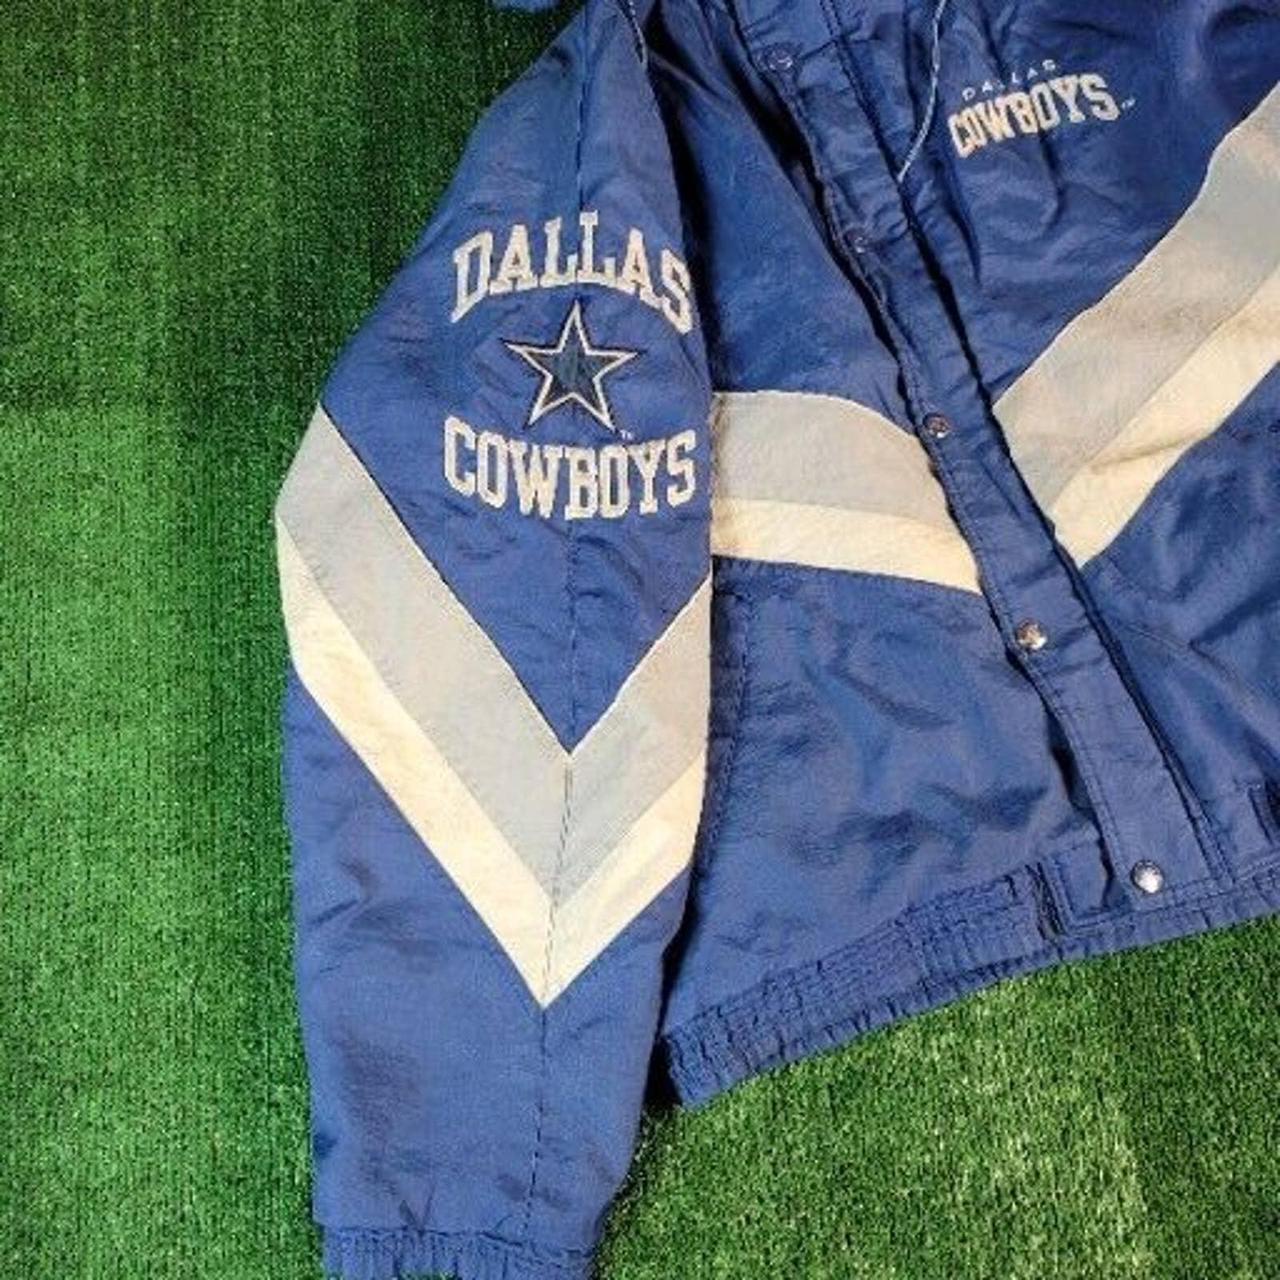 shop.dallascowboys.com: Relive The '90s With 🆕 Starter Jackets